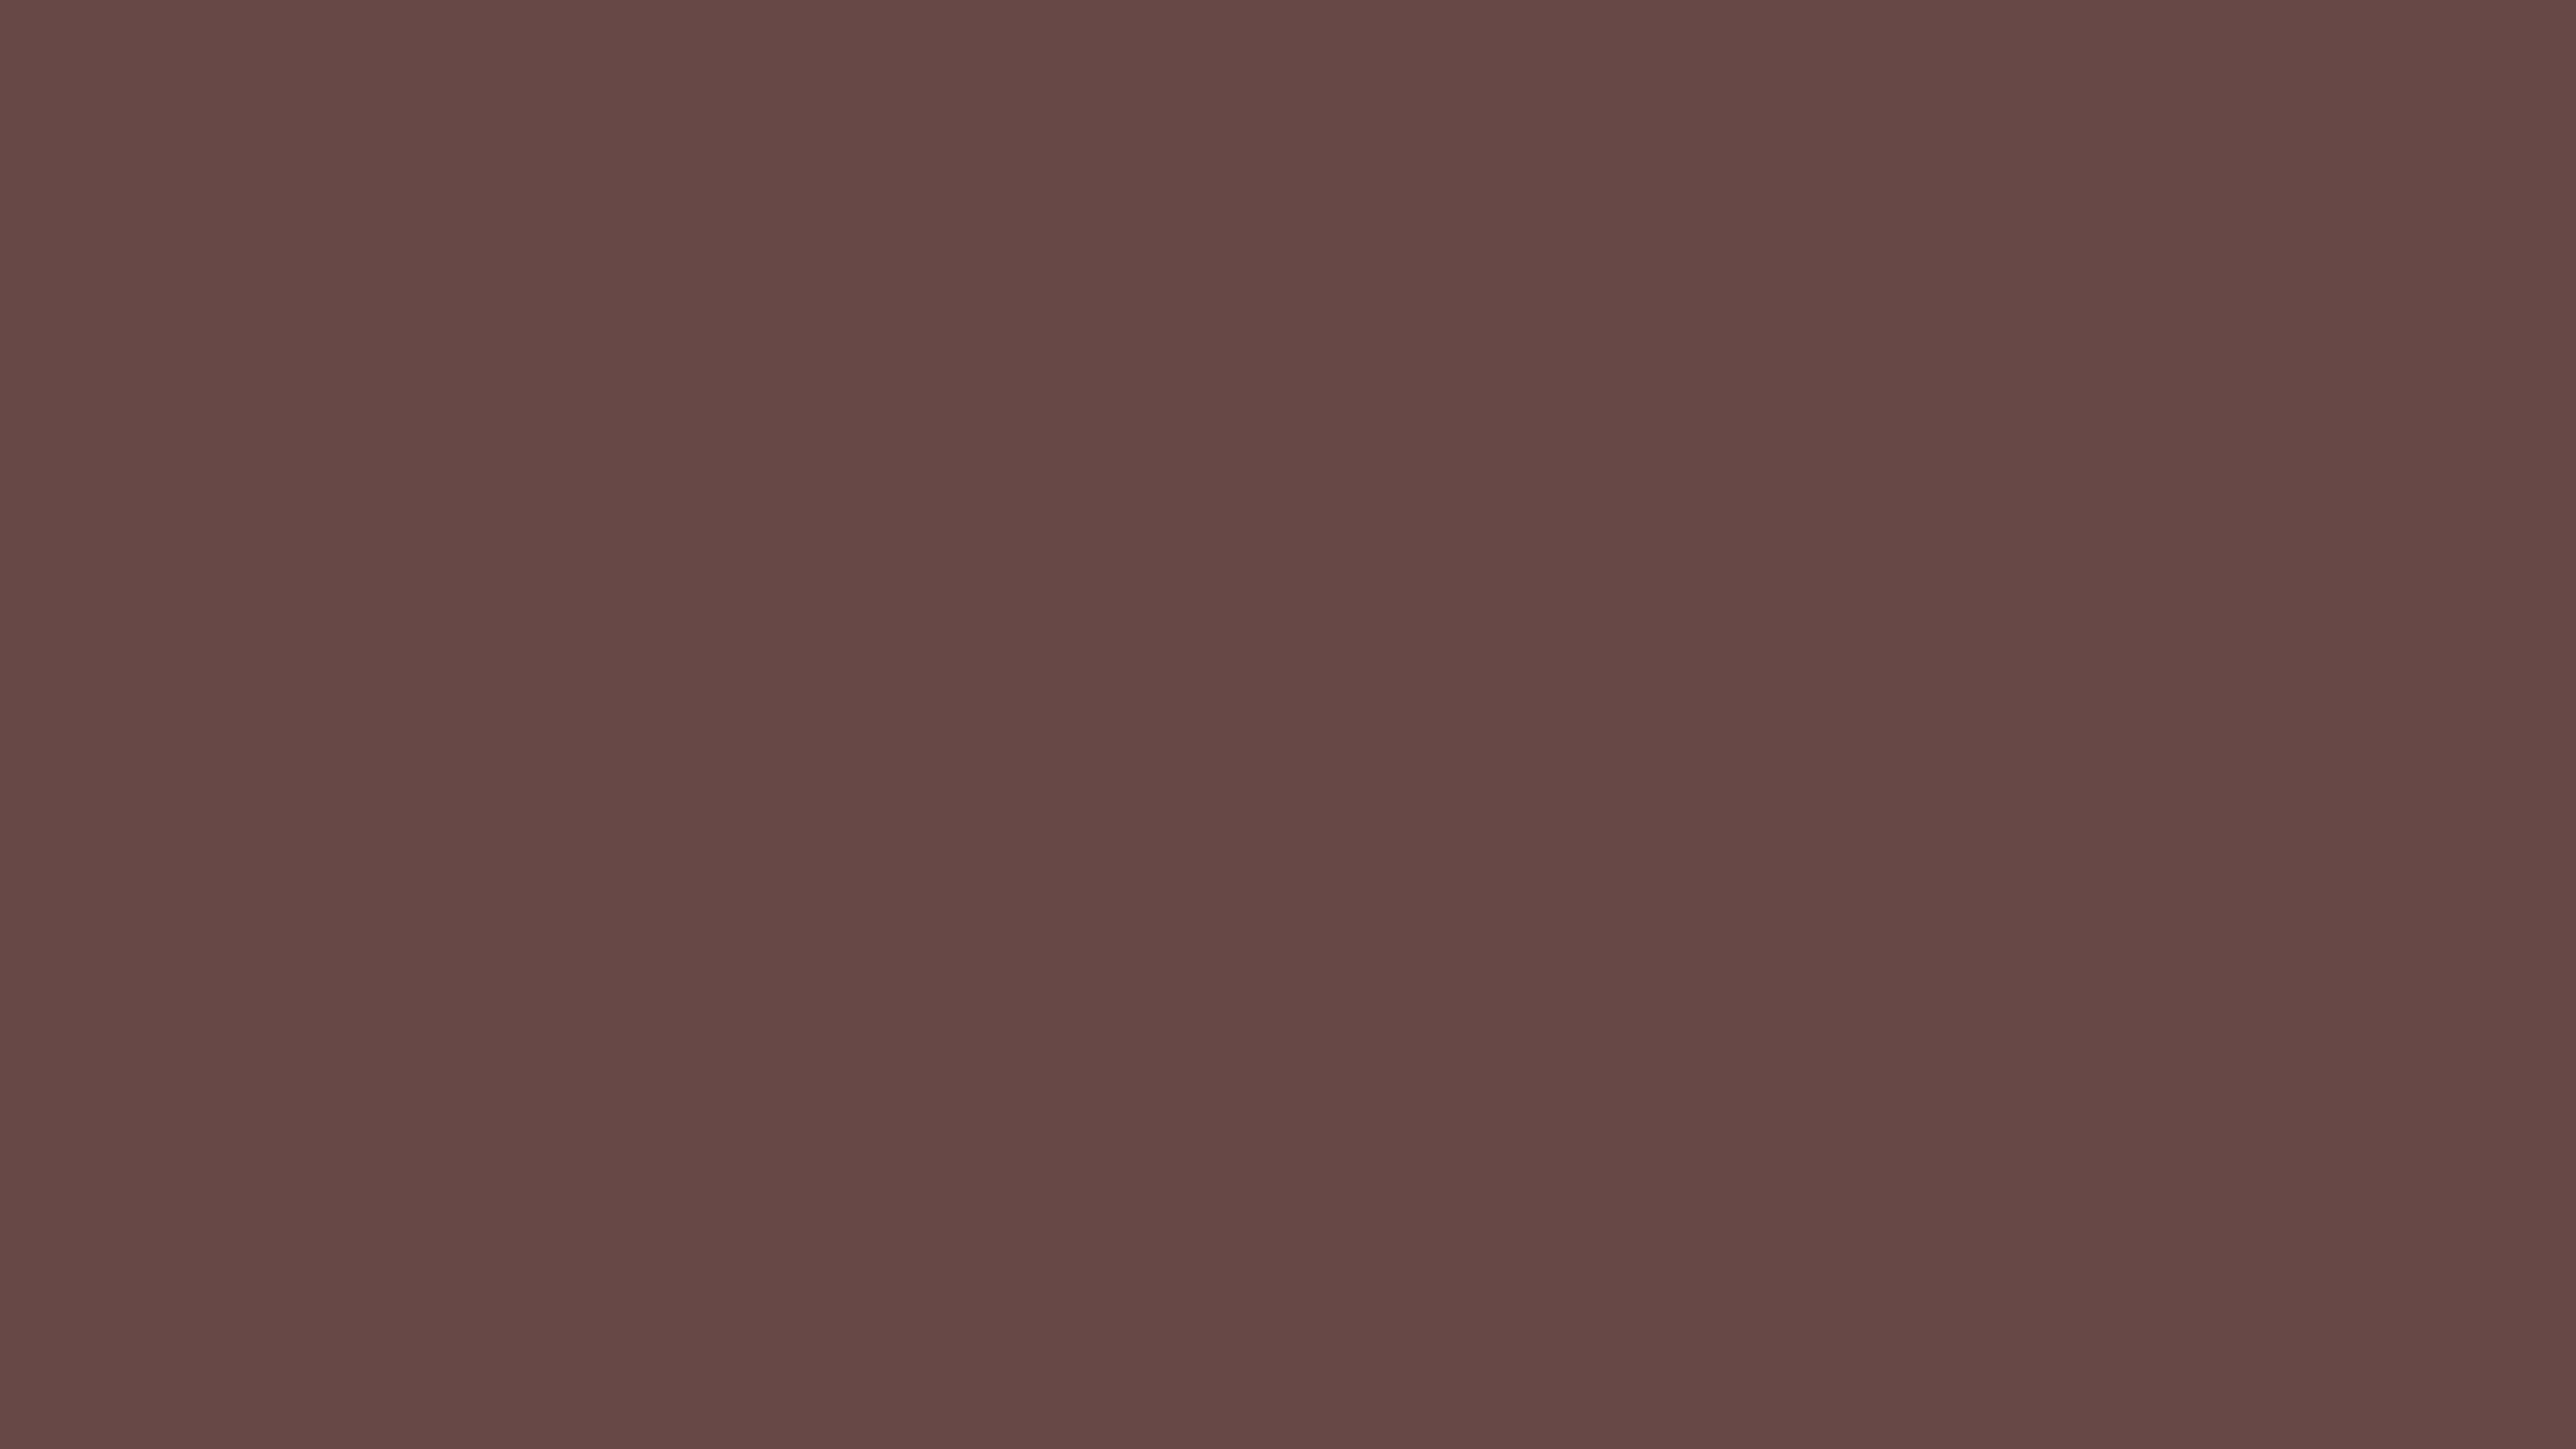 7680x4320 Rose Ebony Solid Color Background